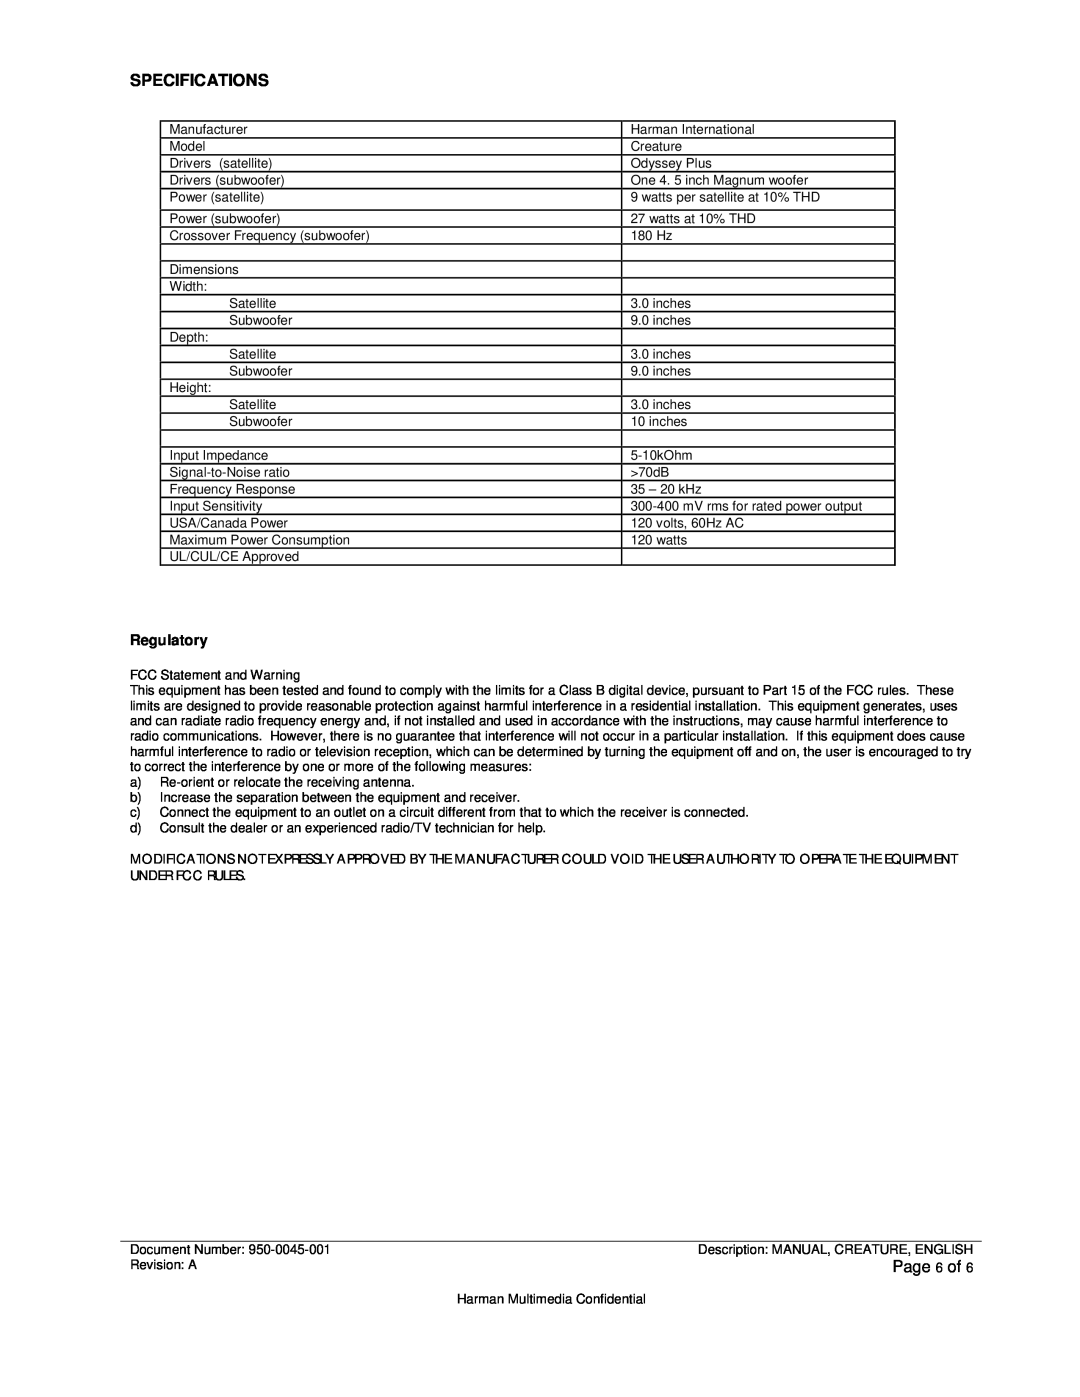 JBL CREATURE SELF POWERED SATELLITE SPEAKERS AND SUBWOOFER manual Specifications, Page 6 of, Regulatory 